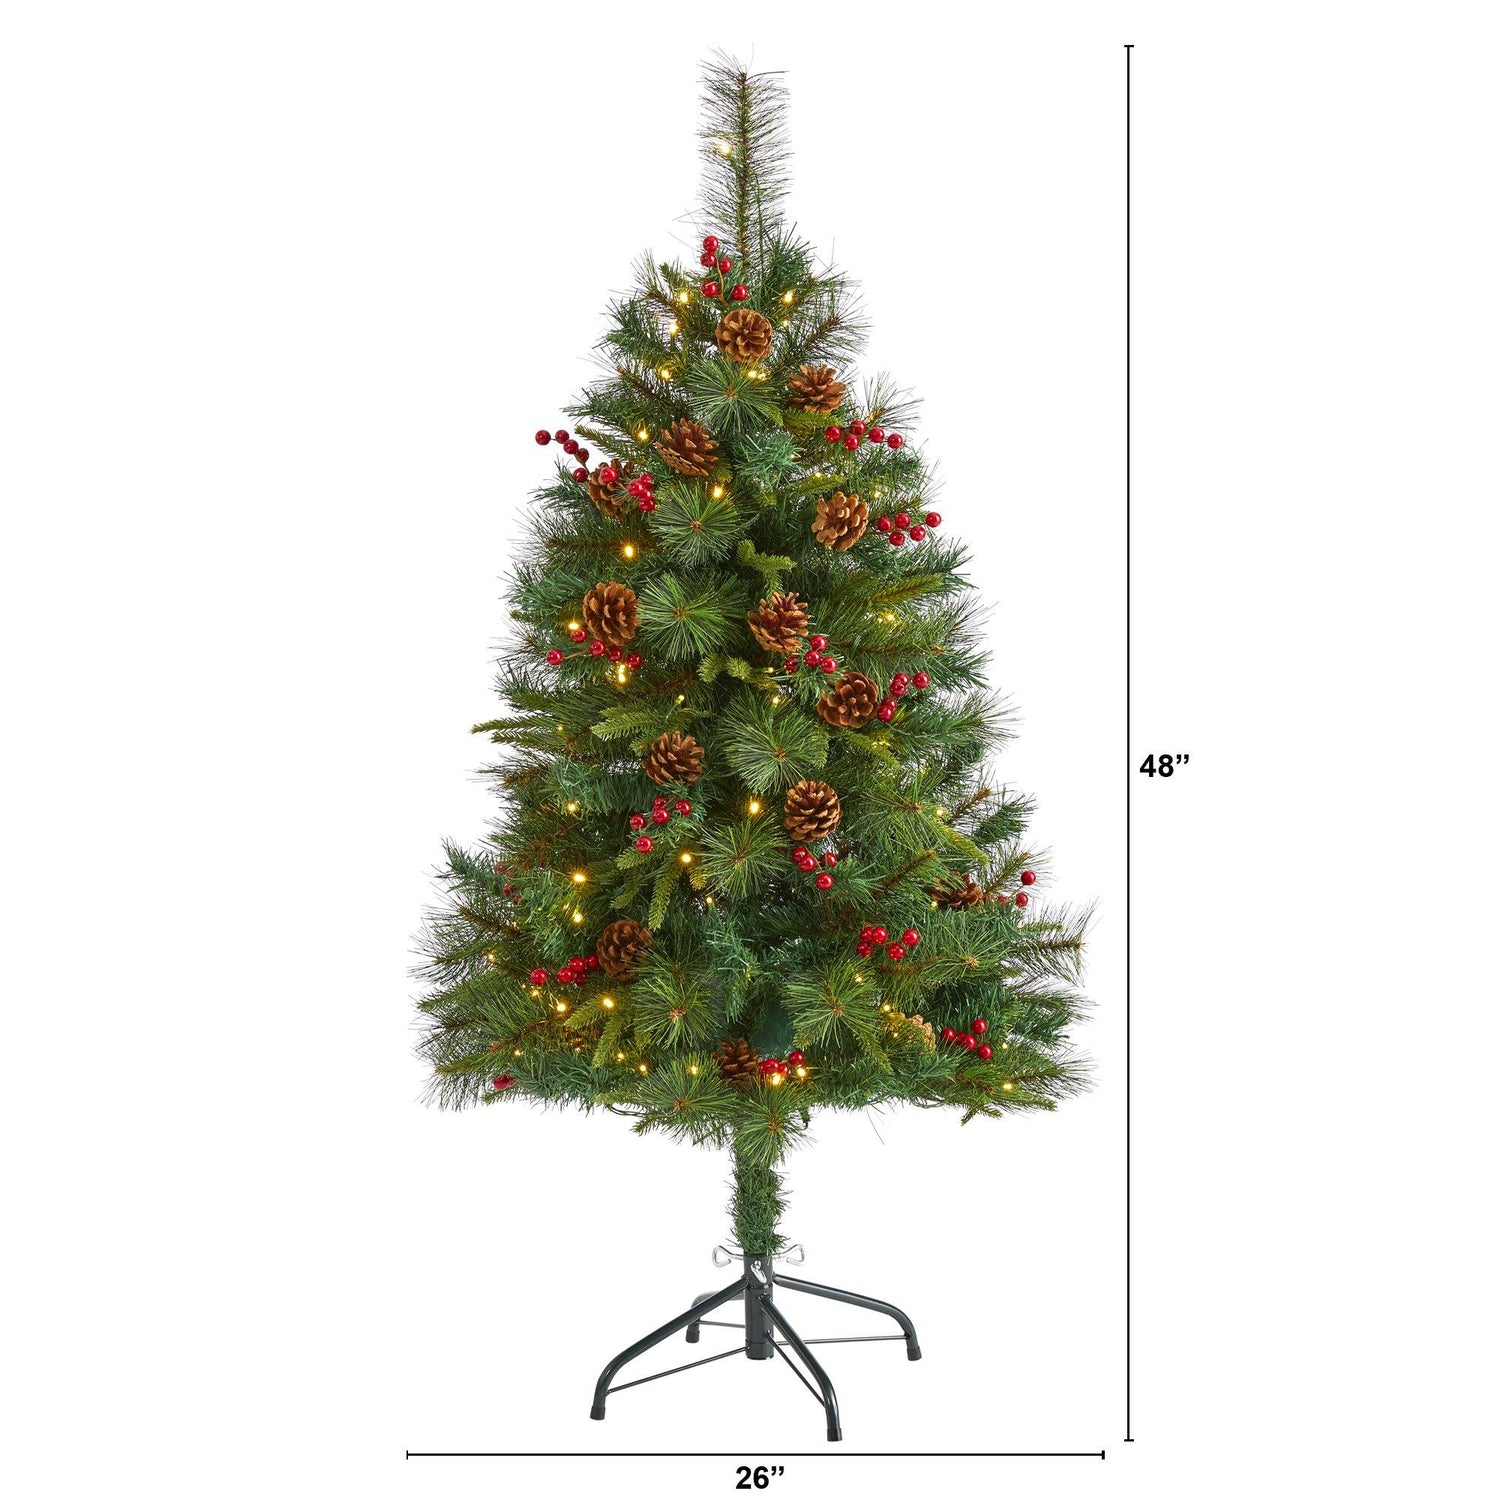 4’ Mixed Pine Artificial Christmas Tree with 100 Clear LED Lights, Pine Cones and Berries